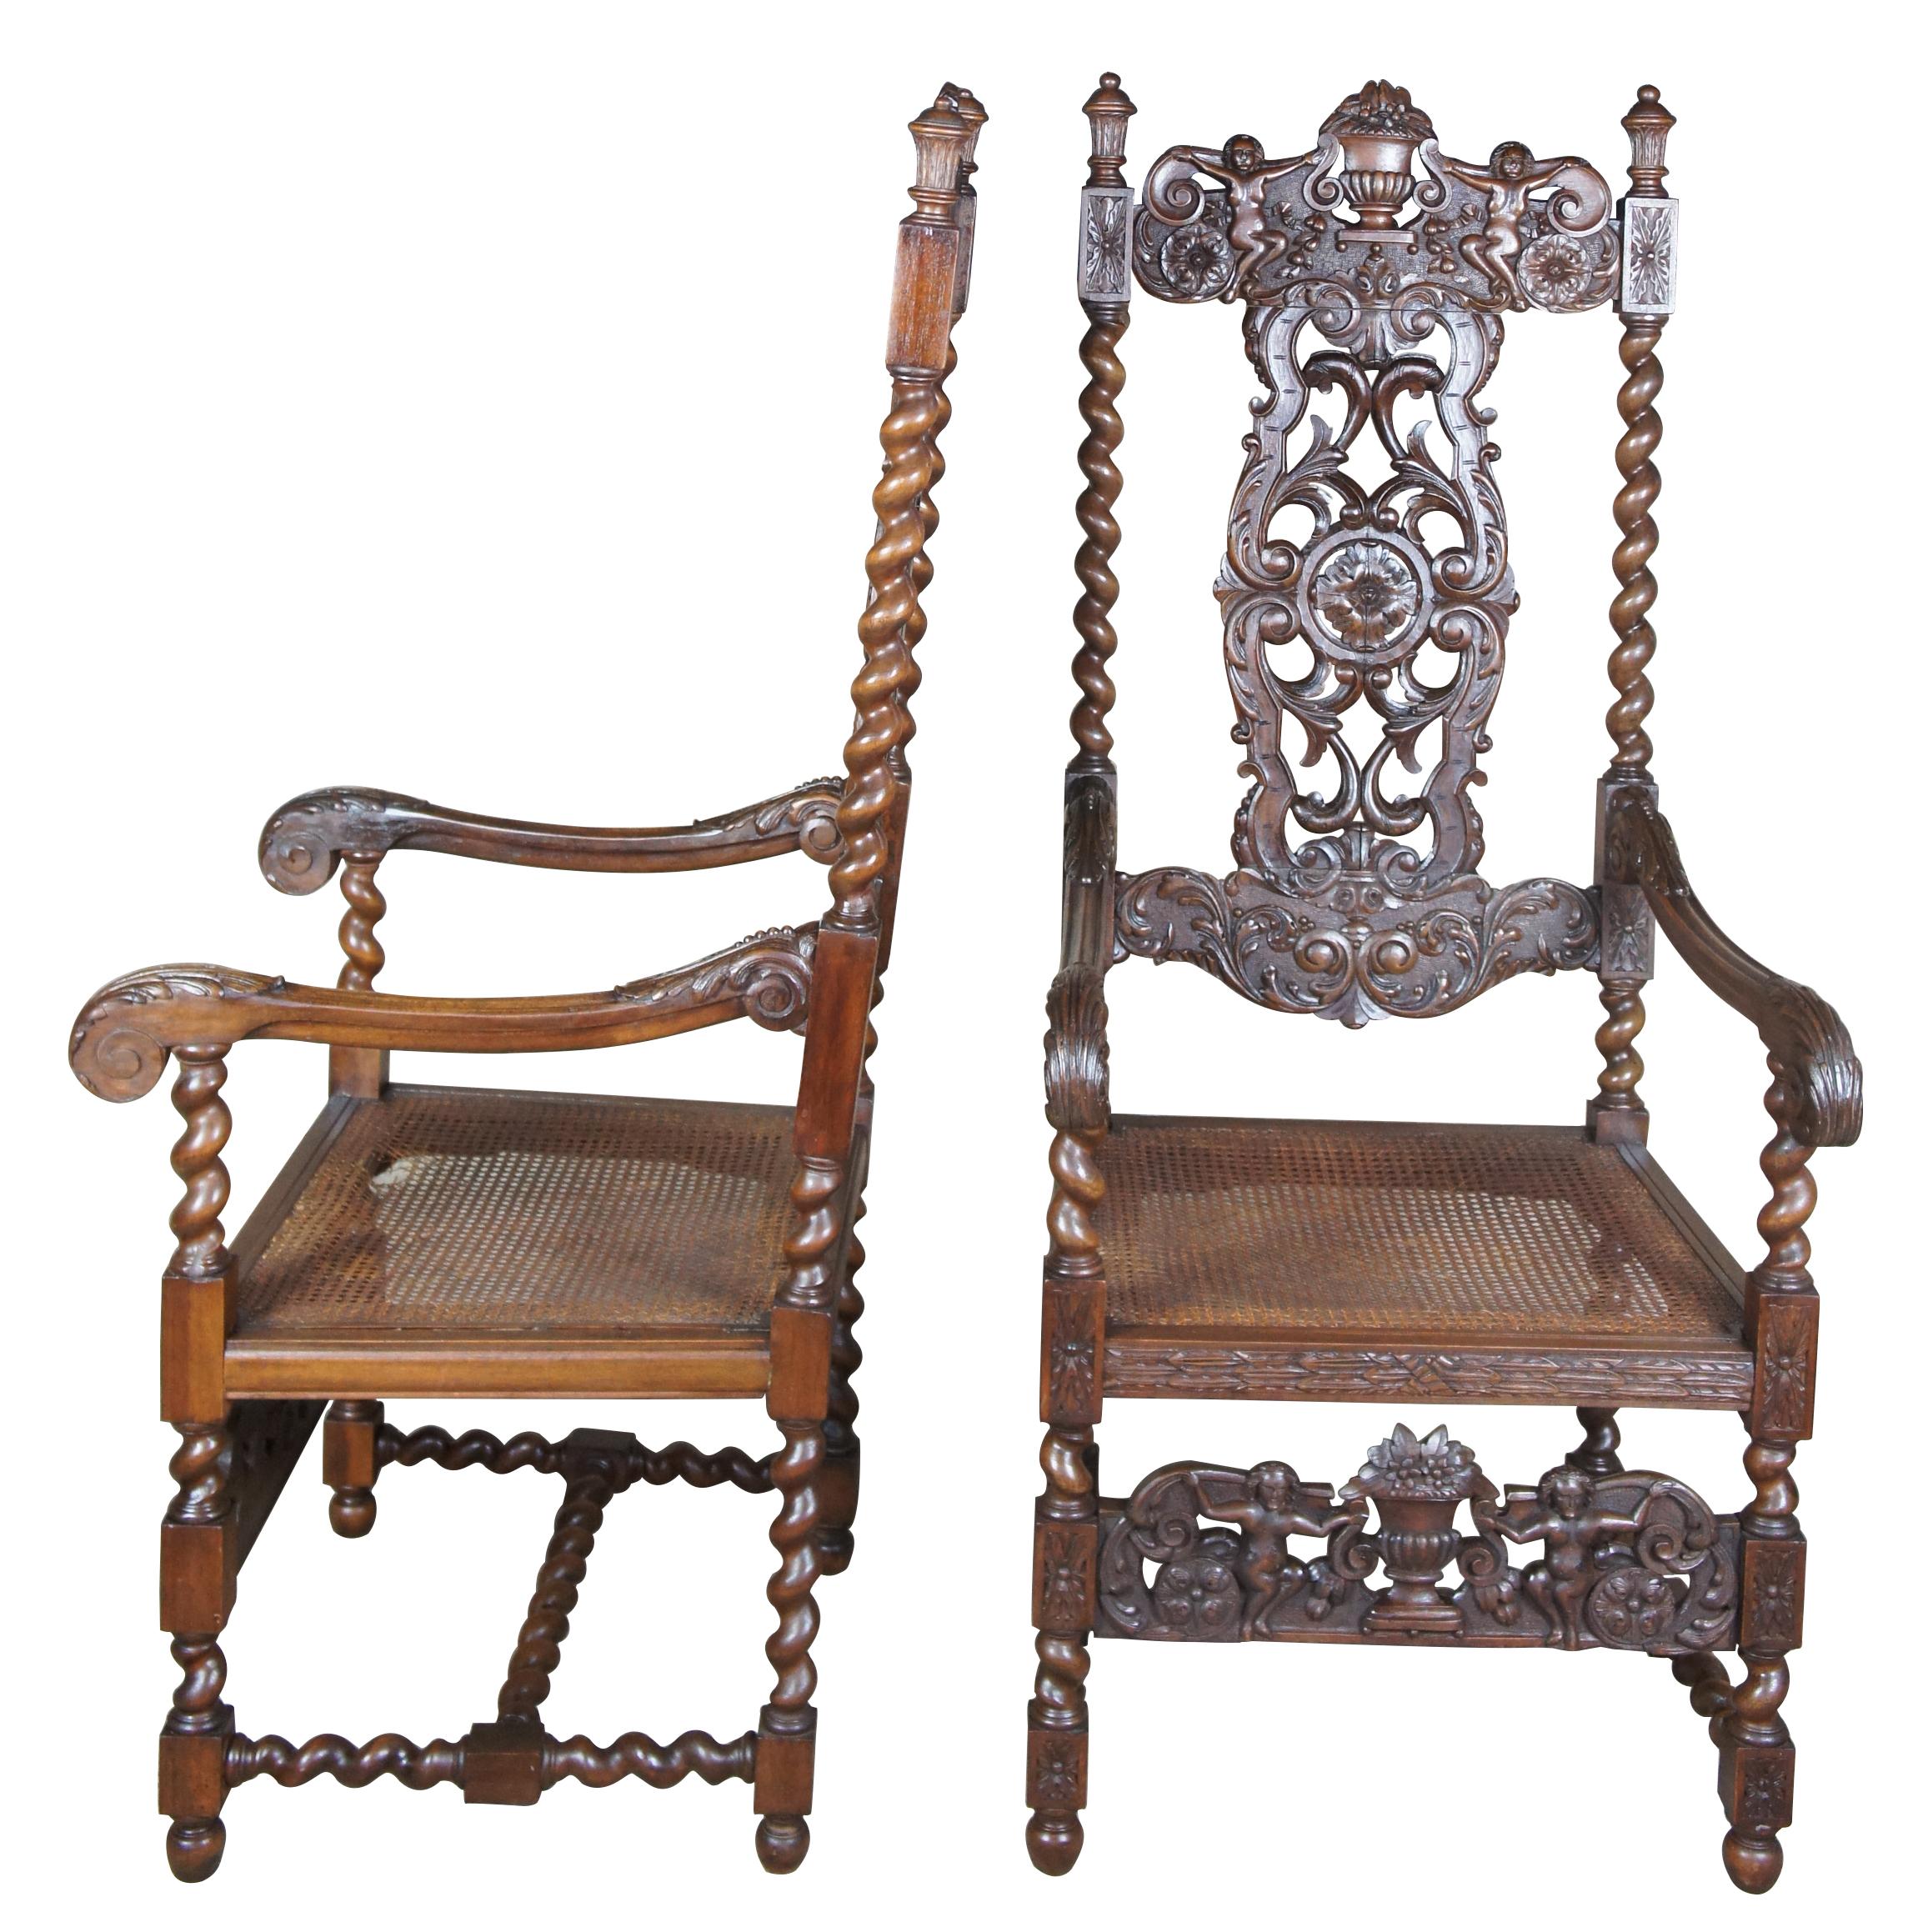 Antique figural carved mahogany throne chairs Victorian Gothic Spanish Revival

Monumental pair of Victorian era throne chairs. Drawing inspiration from Gothic and Spanish styling. Carved from mahogany with pierced back and figural accents.